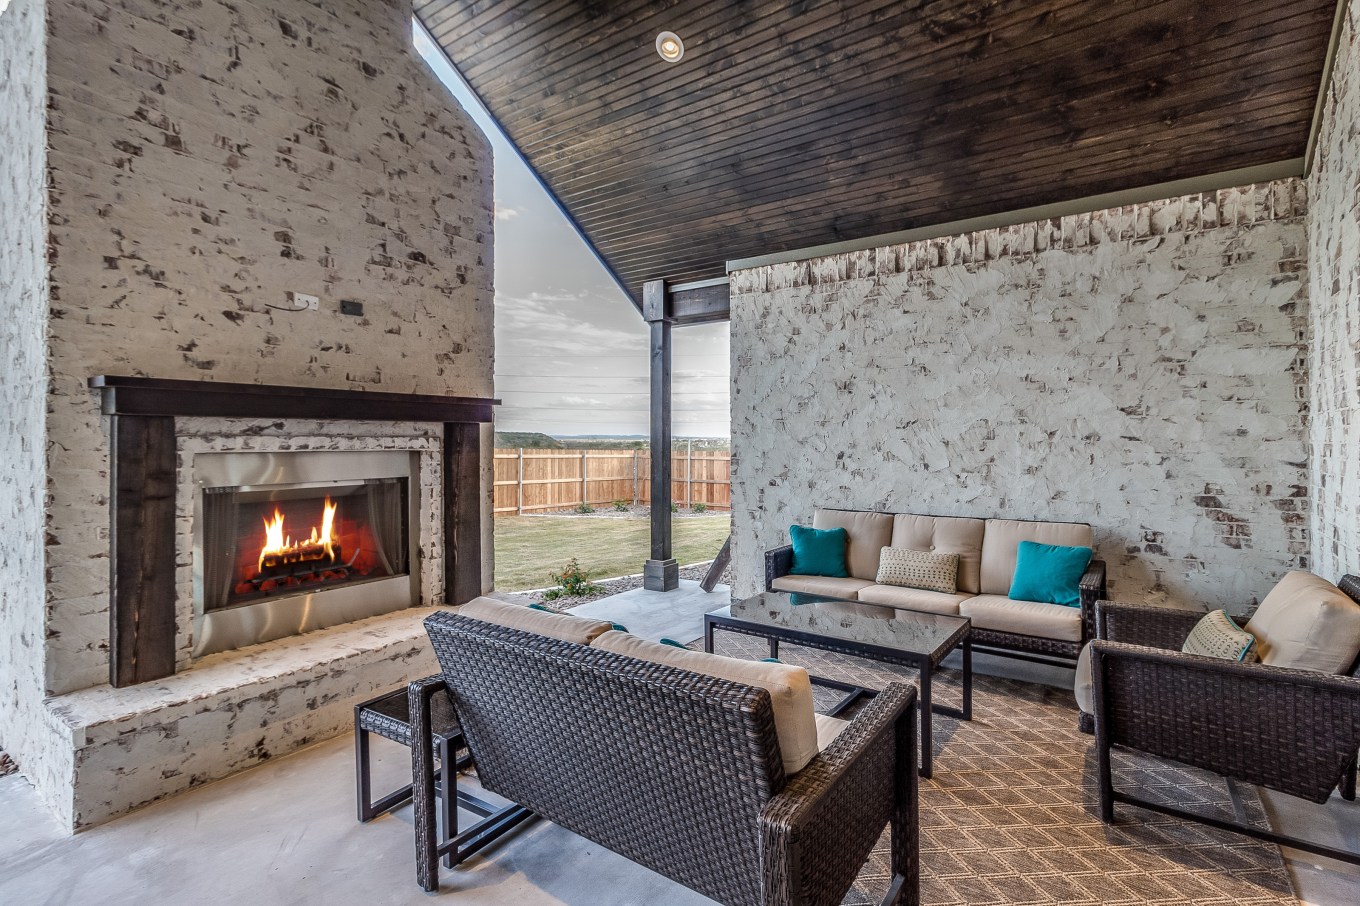 Large traditional outdoor fireplace and seating for several to enjoy the fireplace.